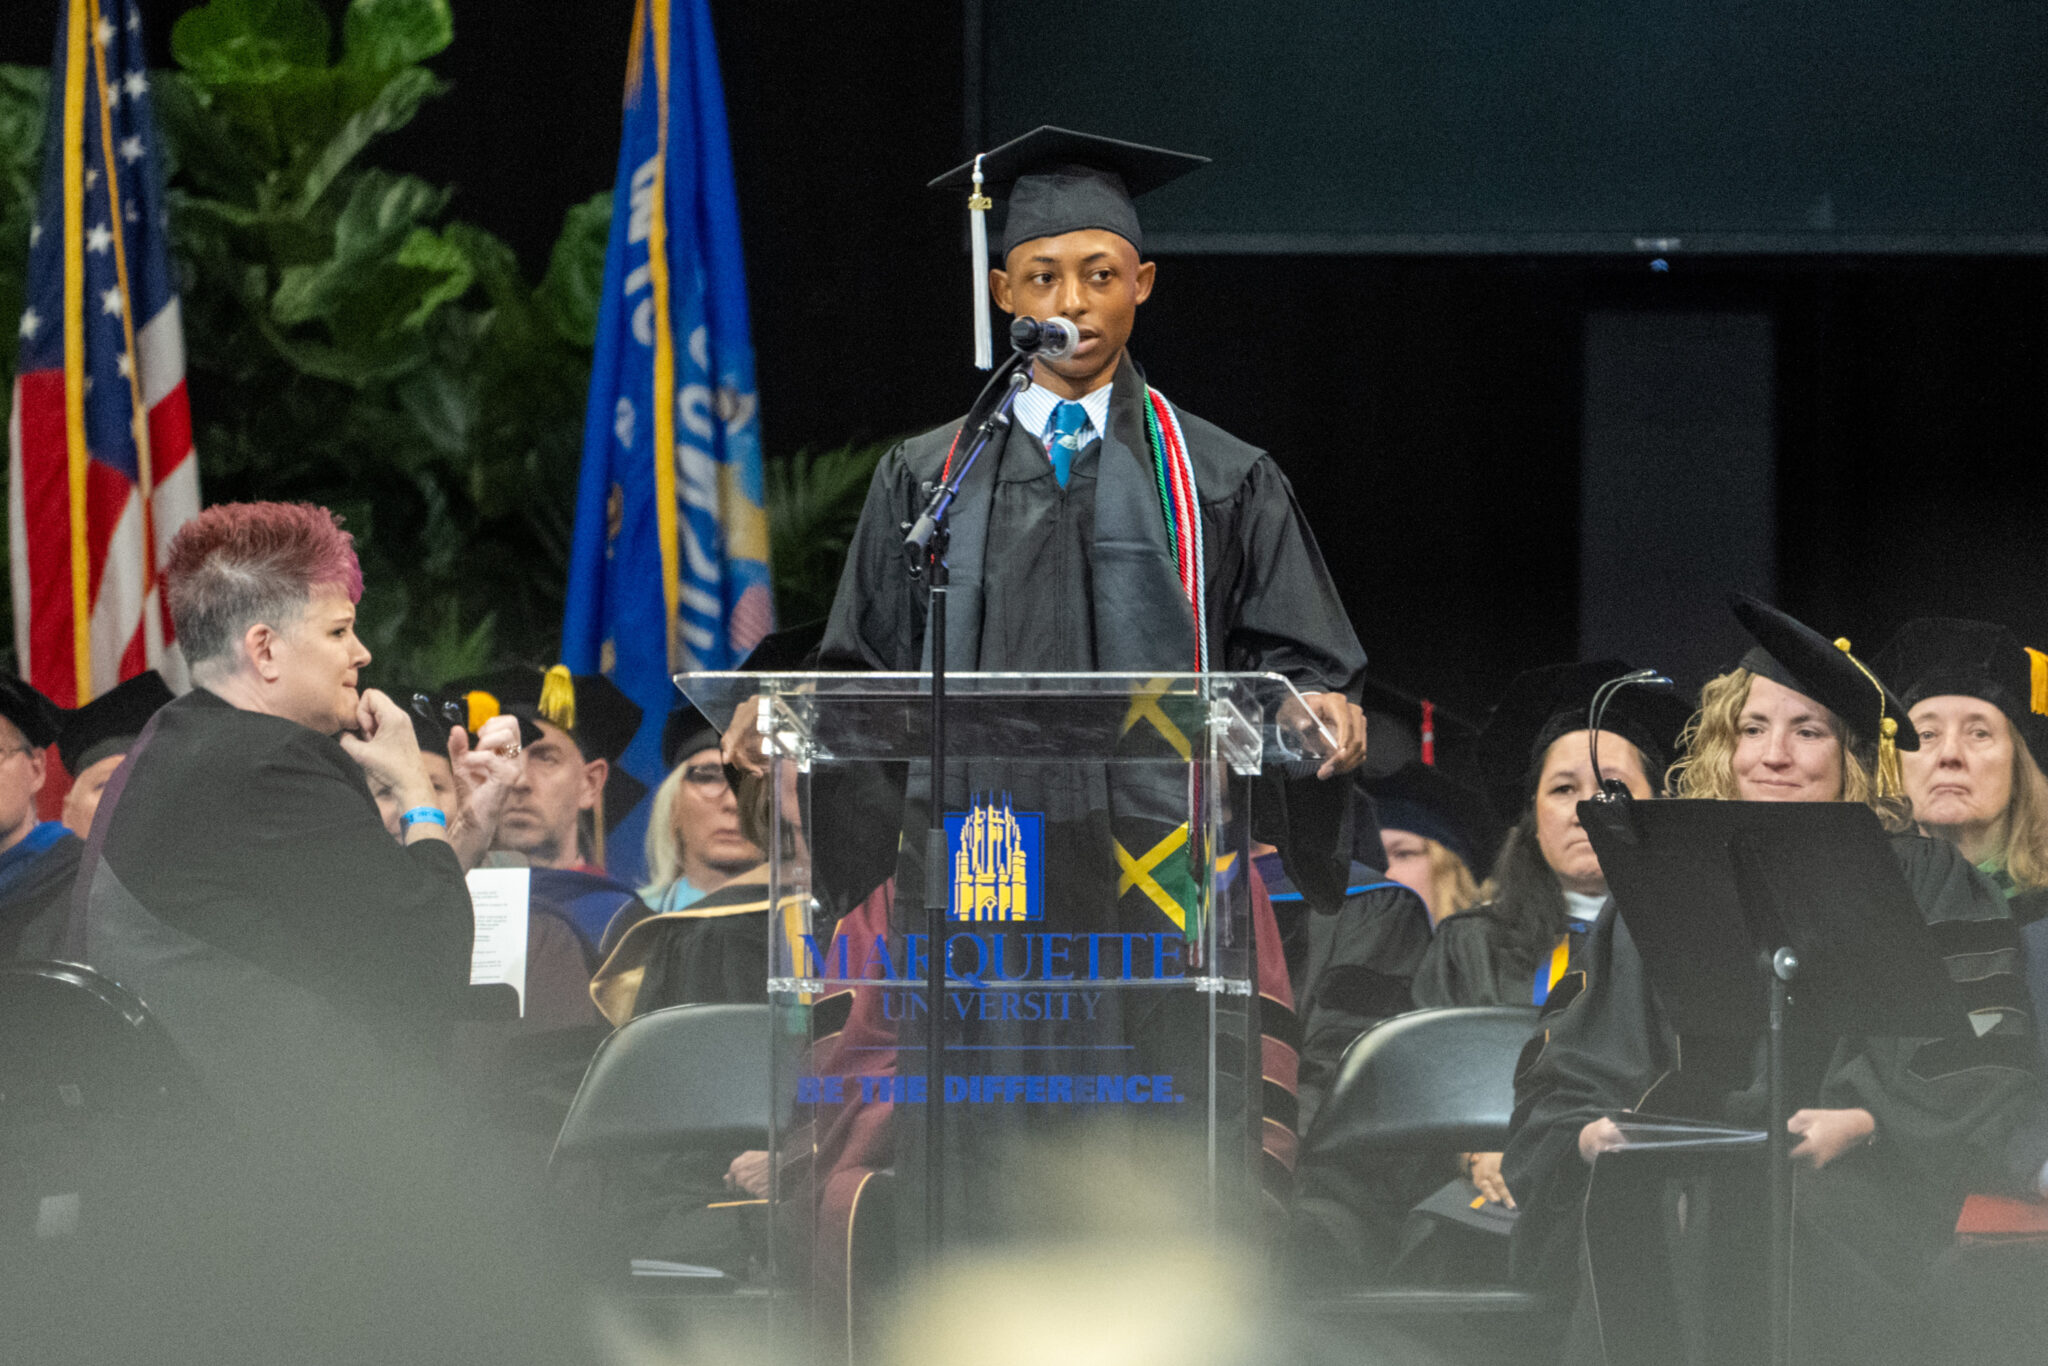 Nominate a student for Commencement senior speaker Marquette Today